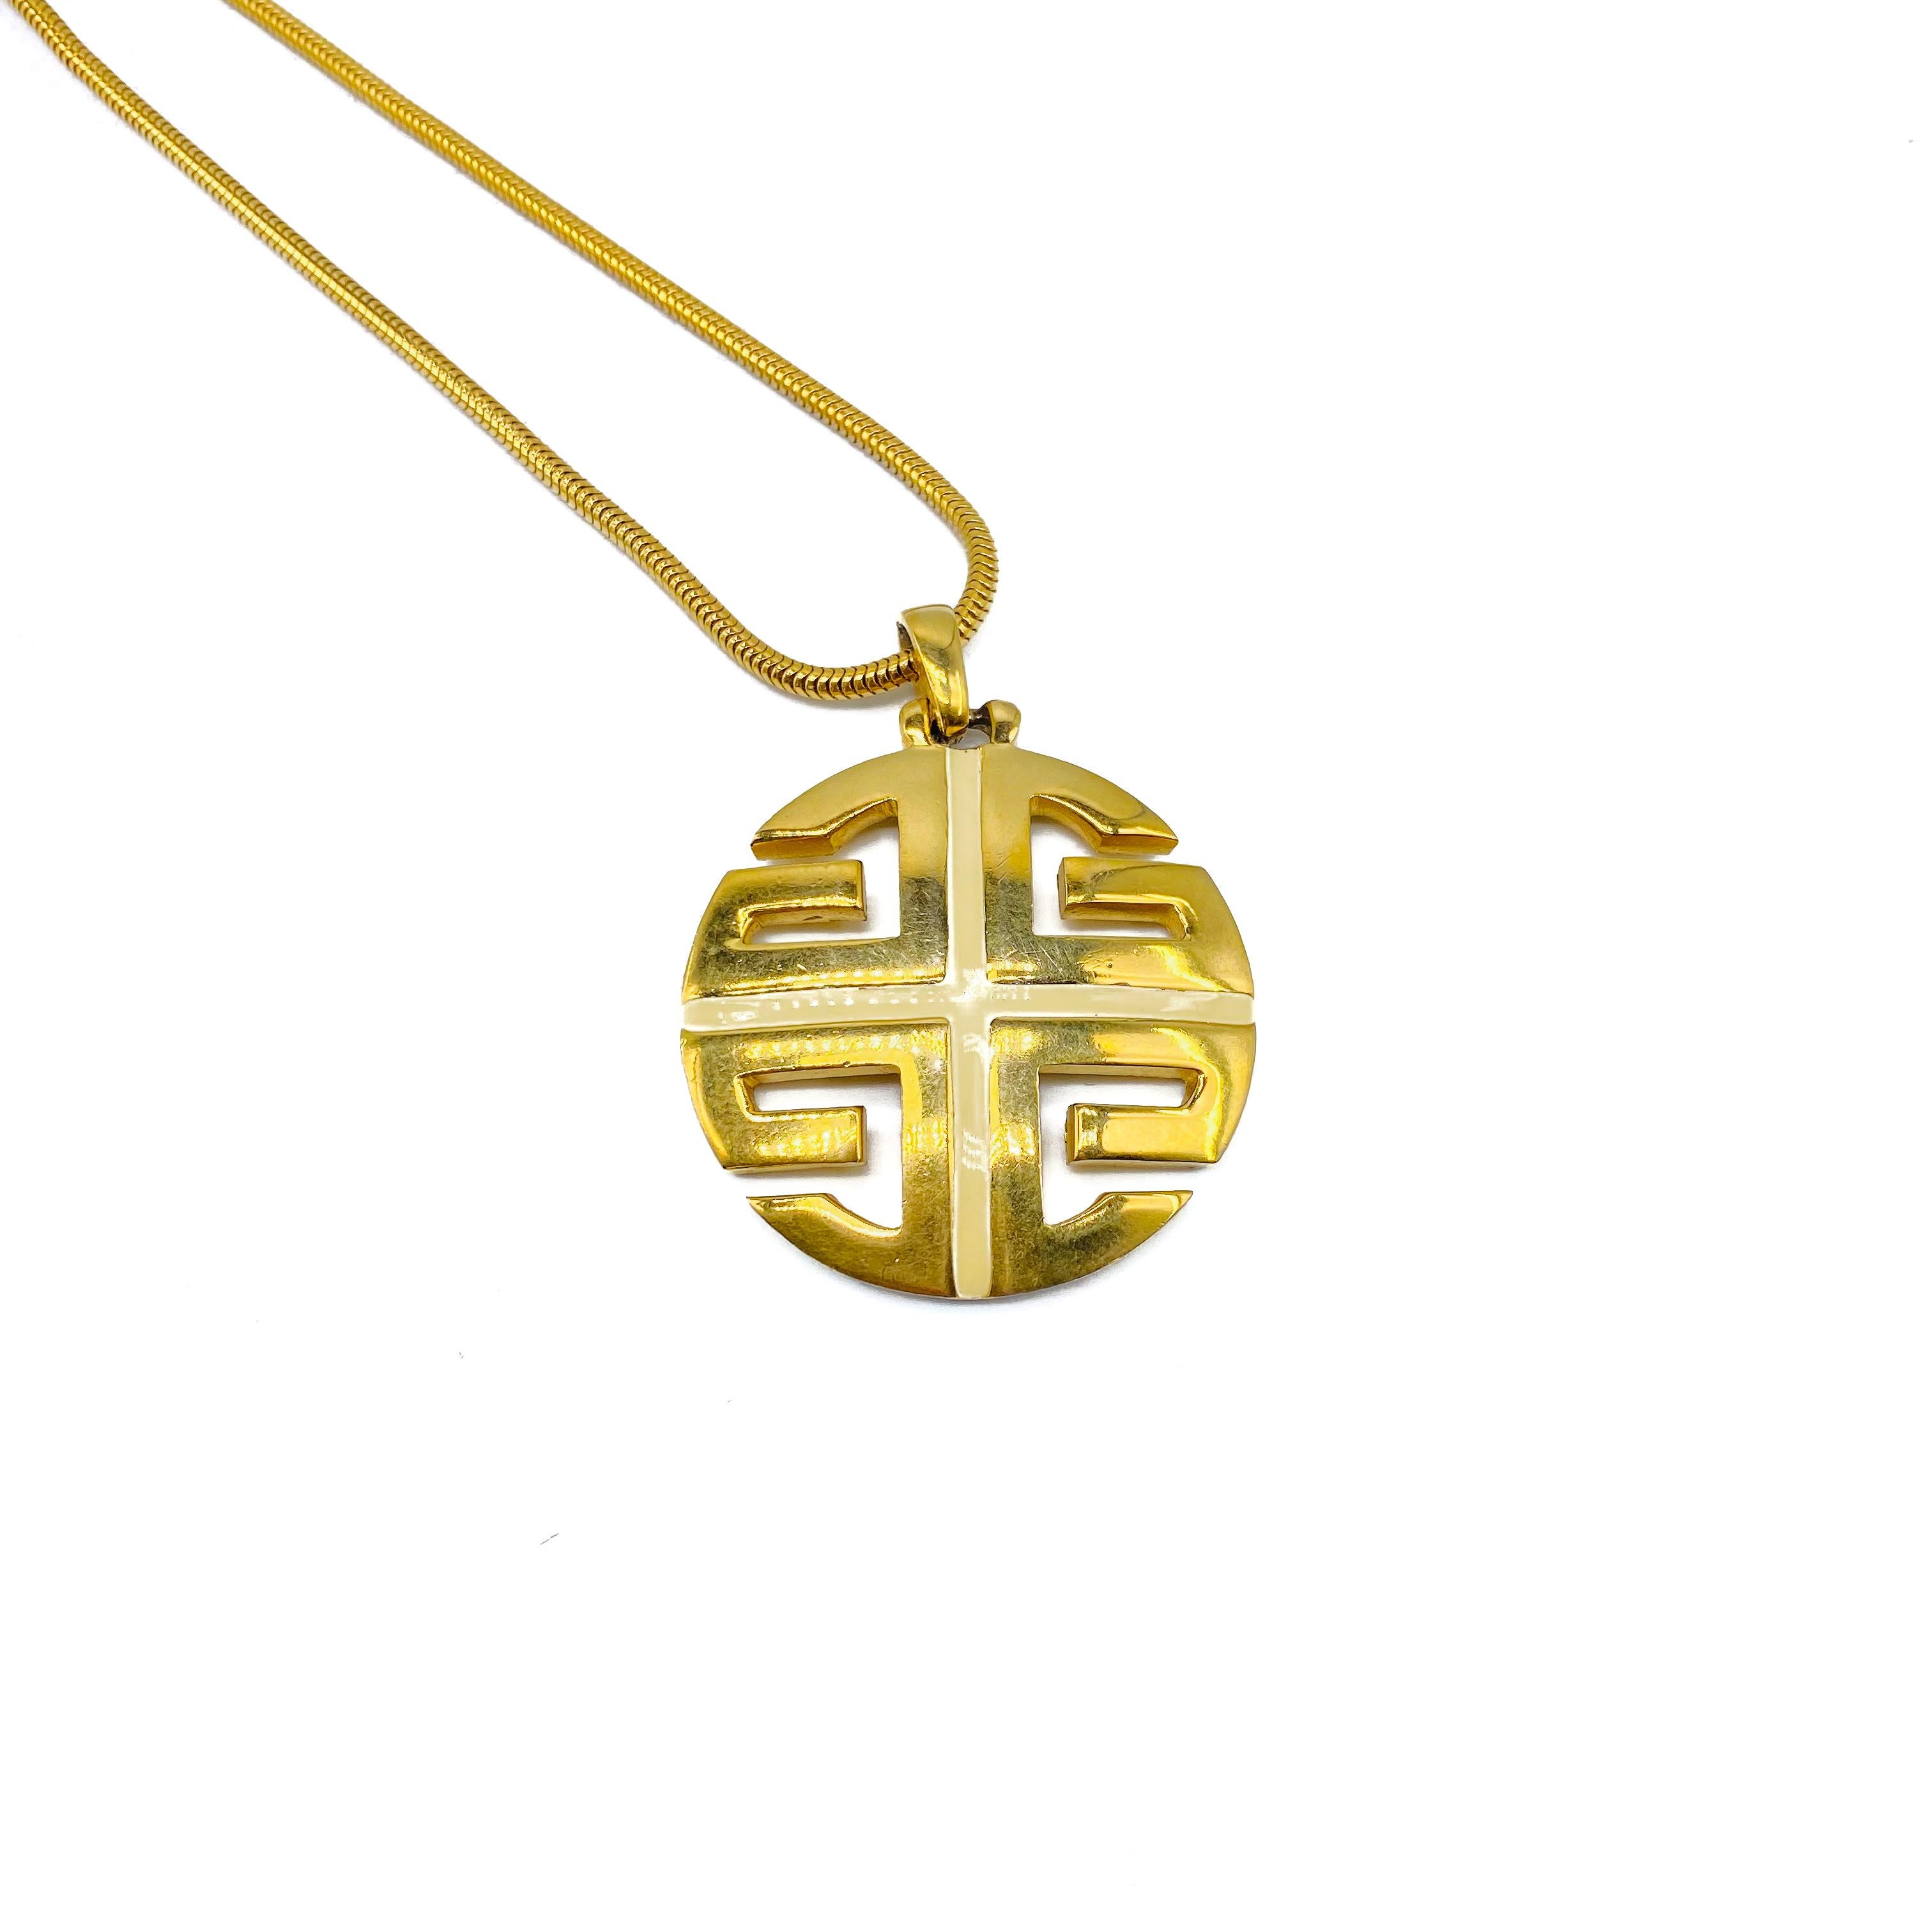 Givenchy Vintage 1970s Pendant Necklace

Incredible statement pendant from the Givenchy 1975 collection  

Detail
-Made in France in 1975
-Gold plated snake chain 
-Circular pendant featuring the iconic 70s Givenchy 4G logo inlaid with cream enamel